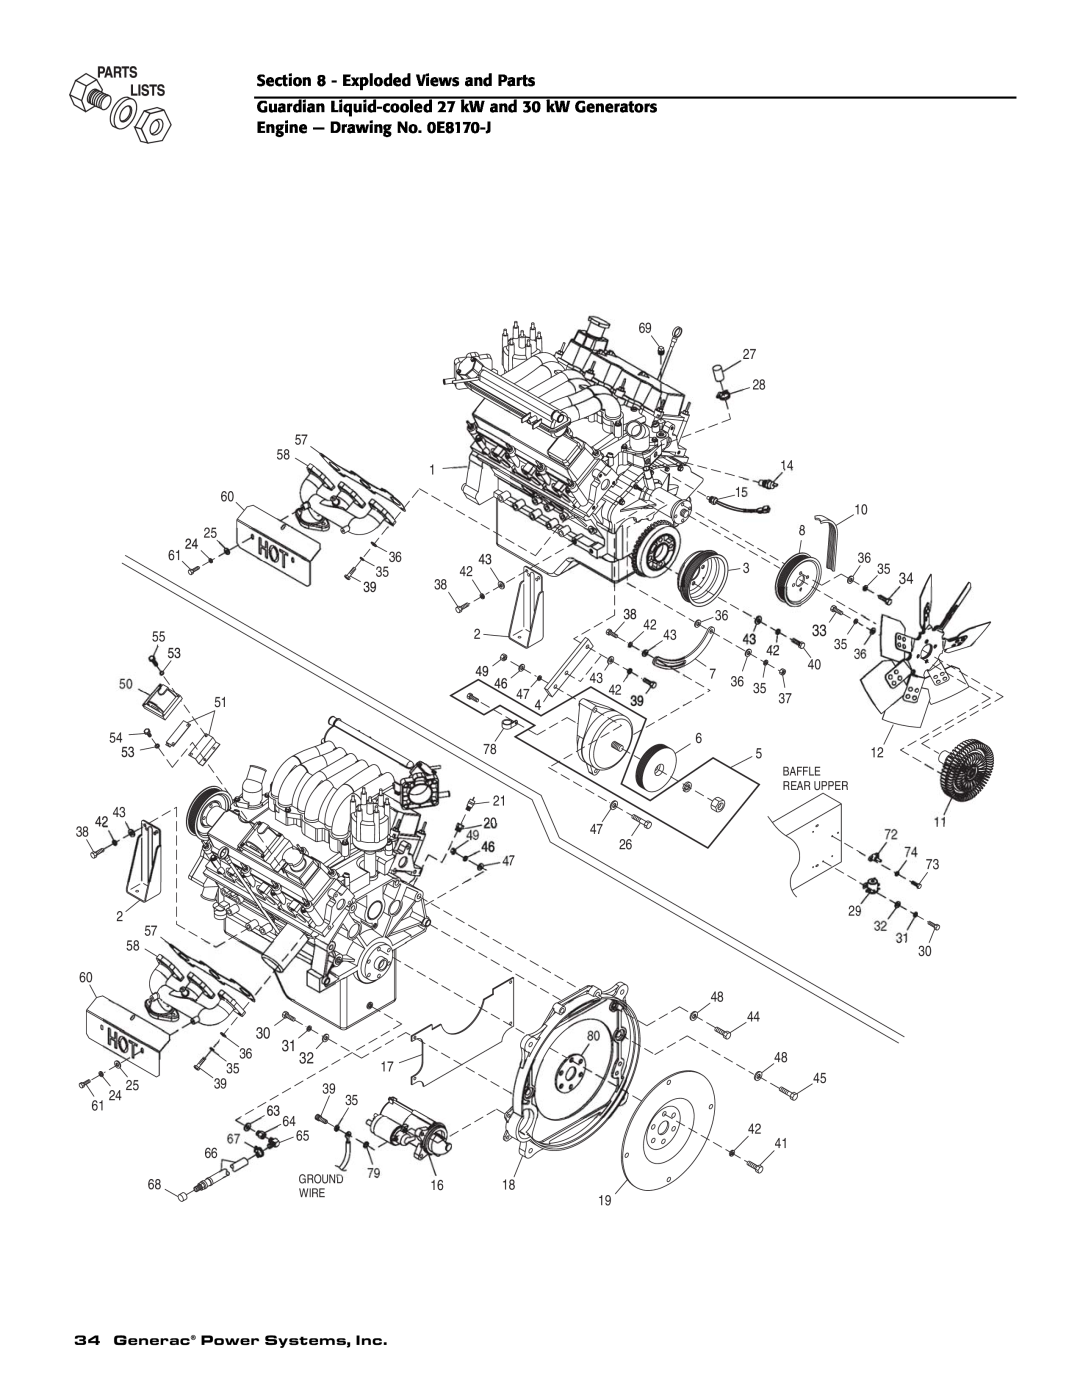 Generac Power Systems 004988-1 owner manual Exploded Views and Parts, Generac Power Systems, Inc 